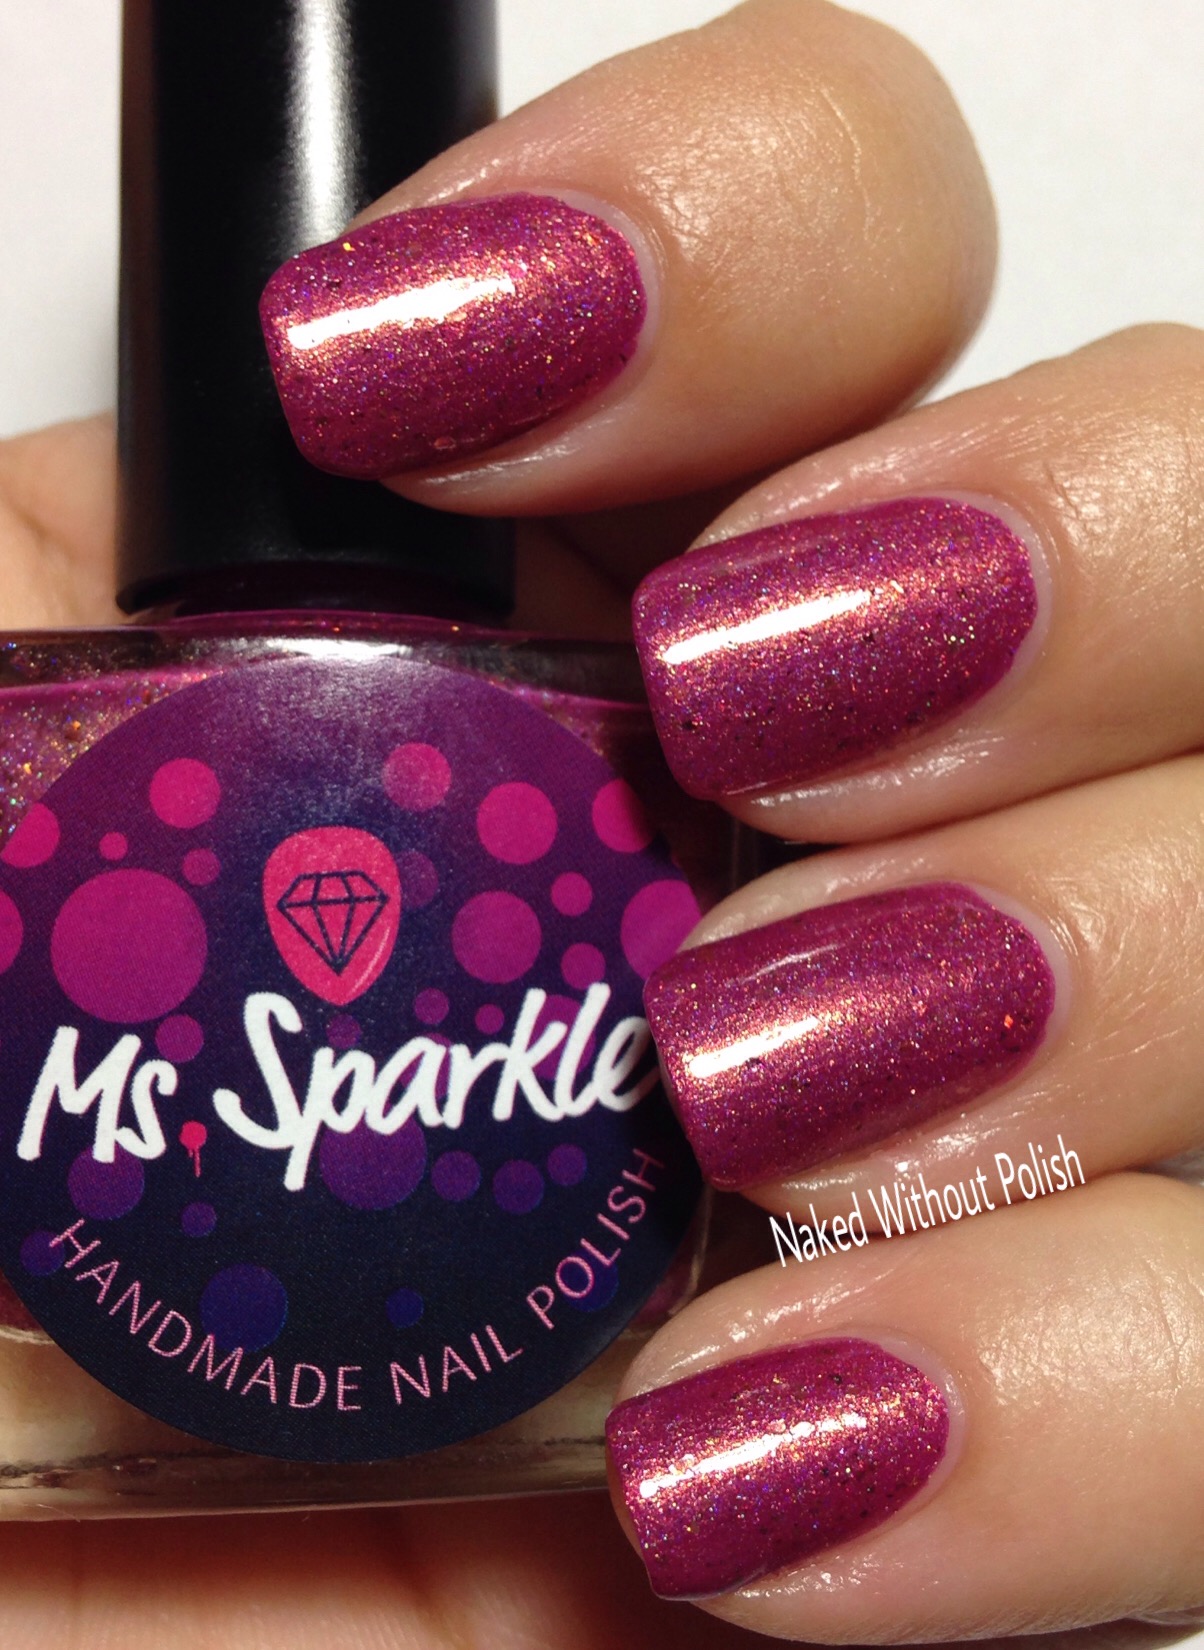 Polish-Pickup-Ms-Sparkle-Fear-is-Stupid-So-Are-Regrets-11